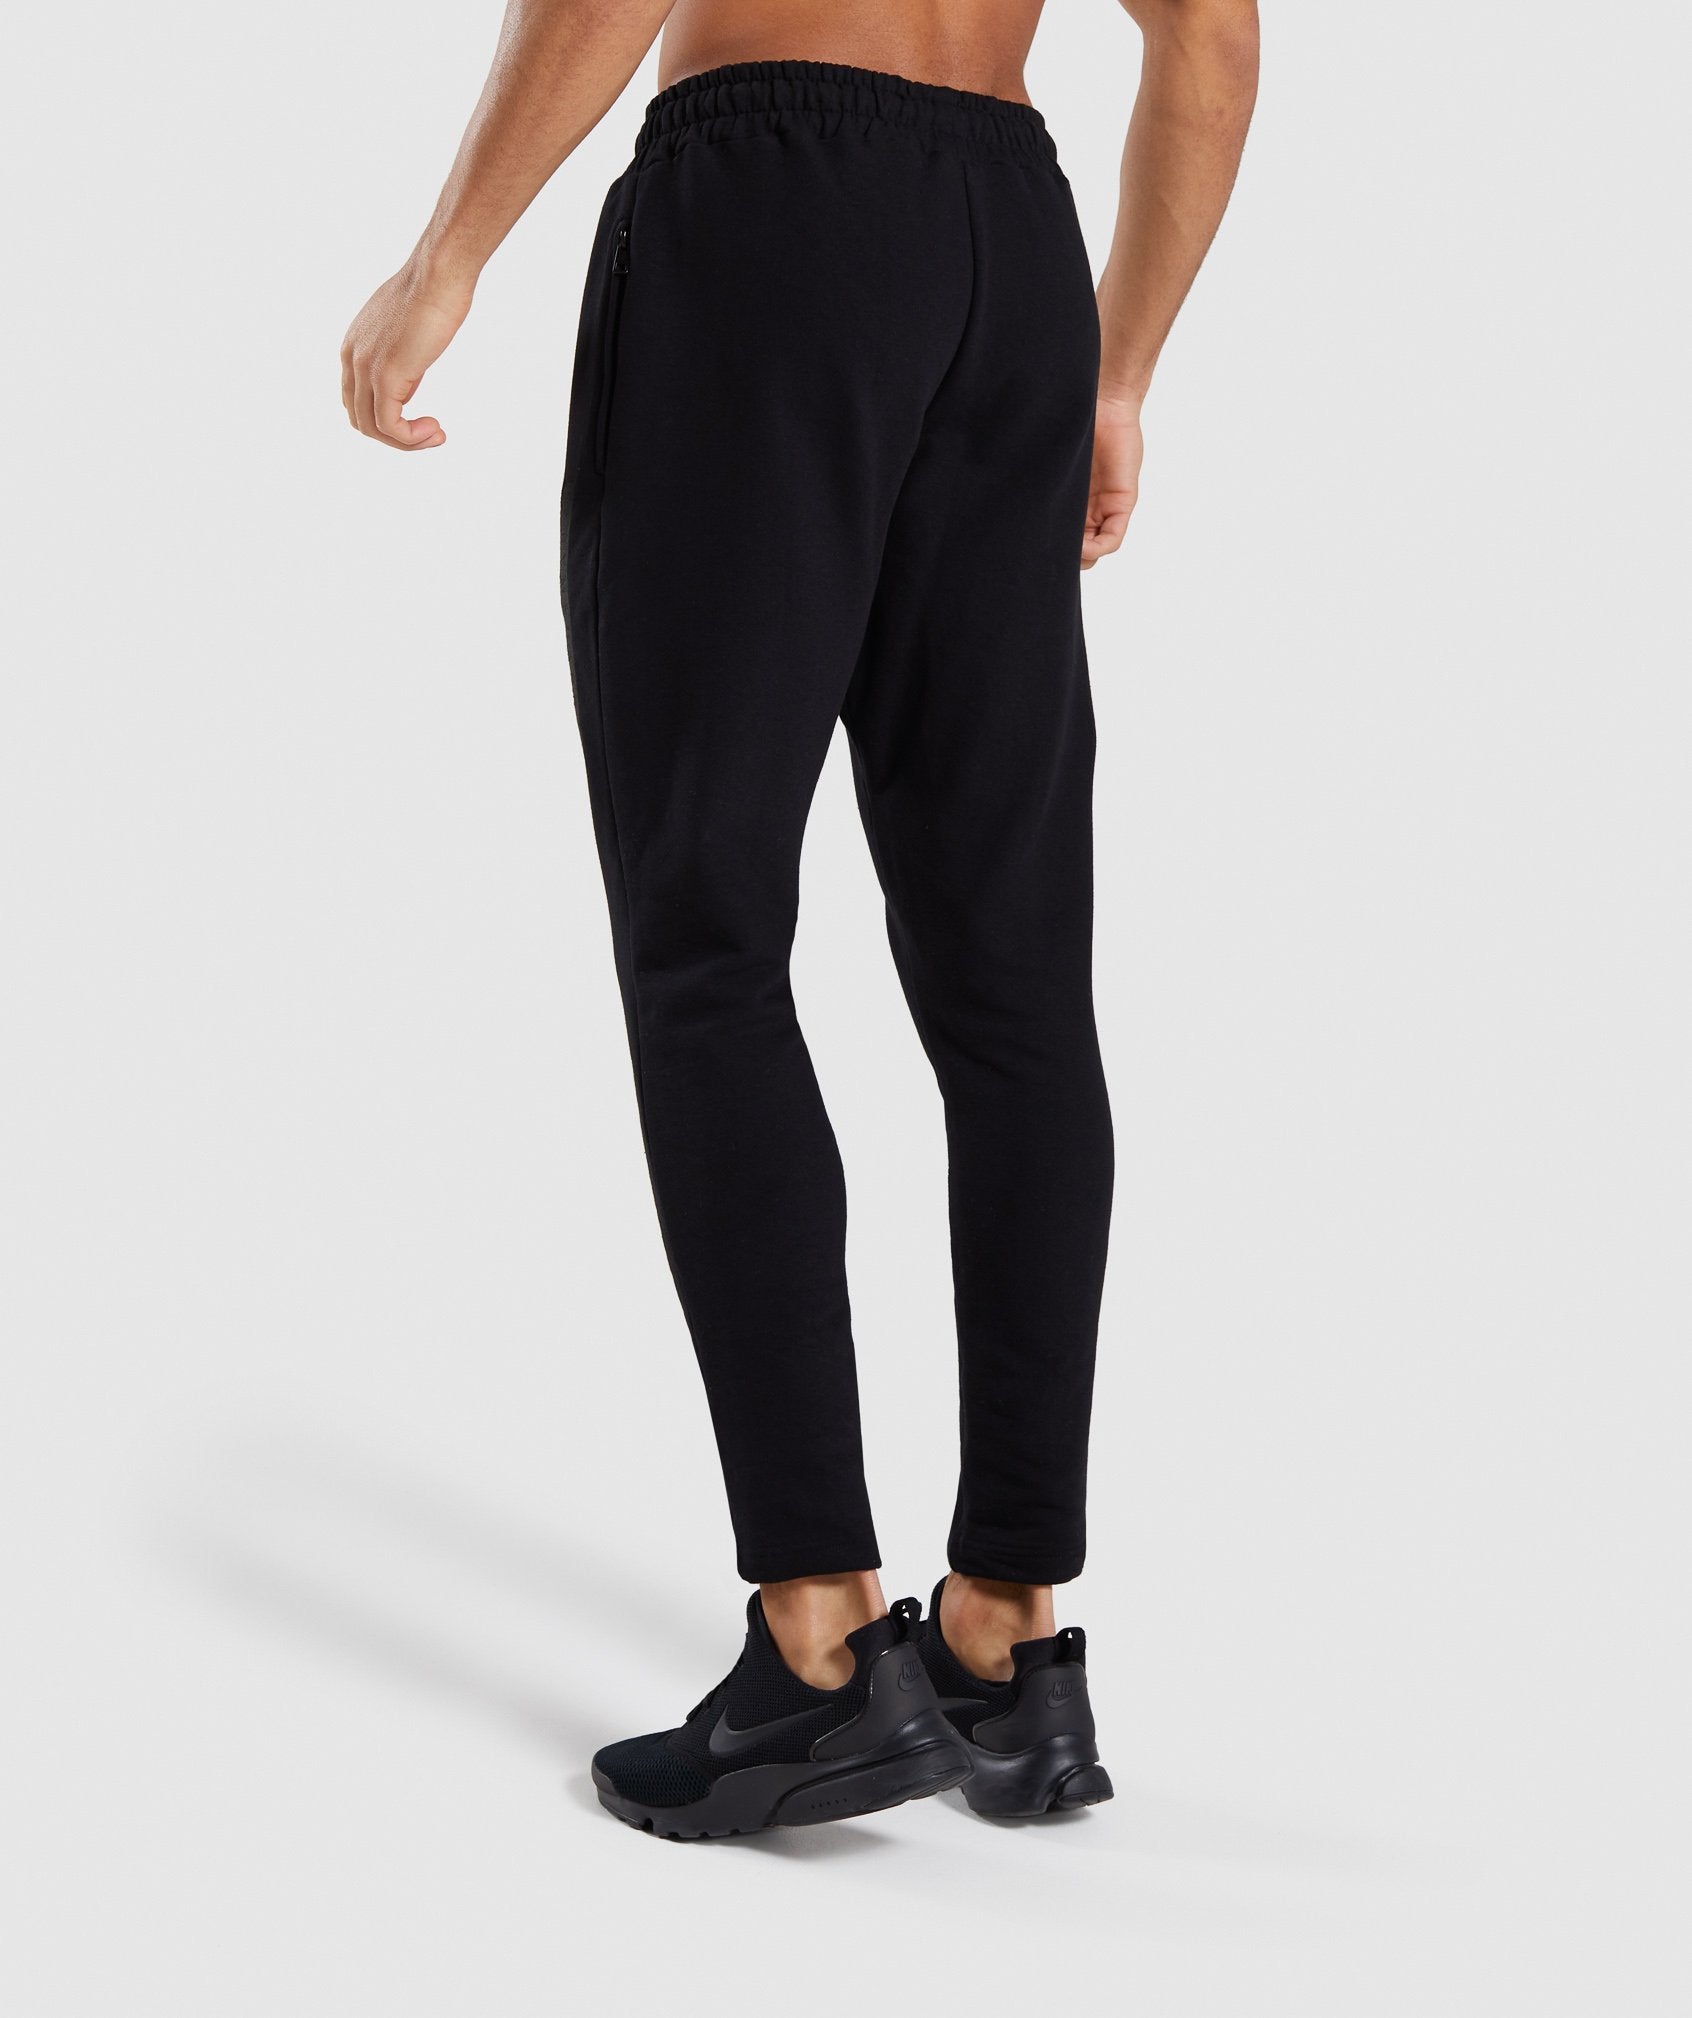 Crucial Jogger in Black - view 2